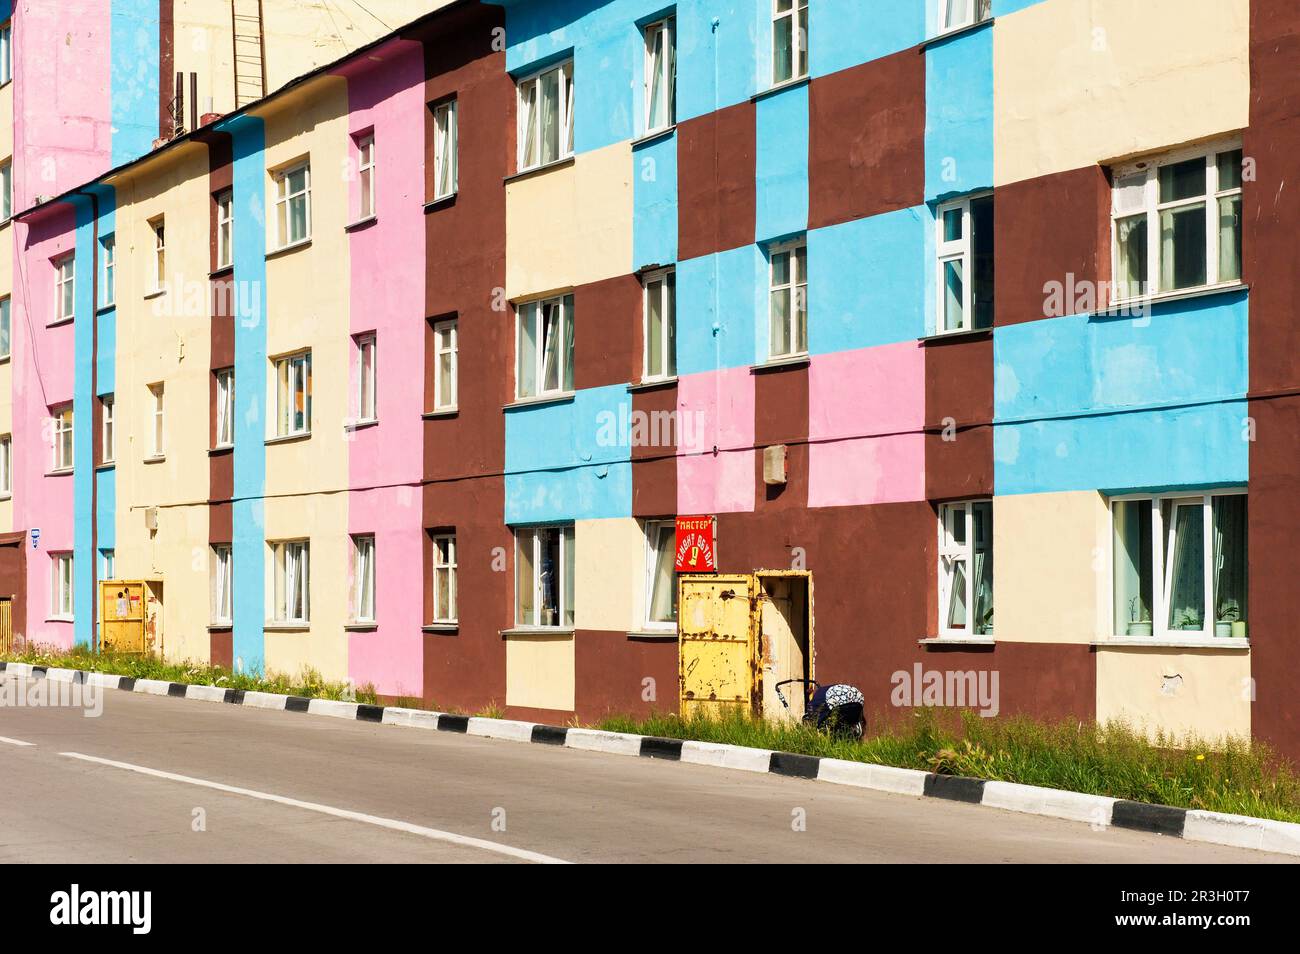 Coloured dwellings, Siberian town of Anadyr, Chukotka Province, Russian Far East Stock Photo